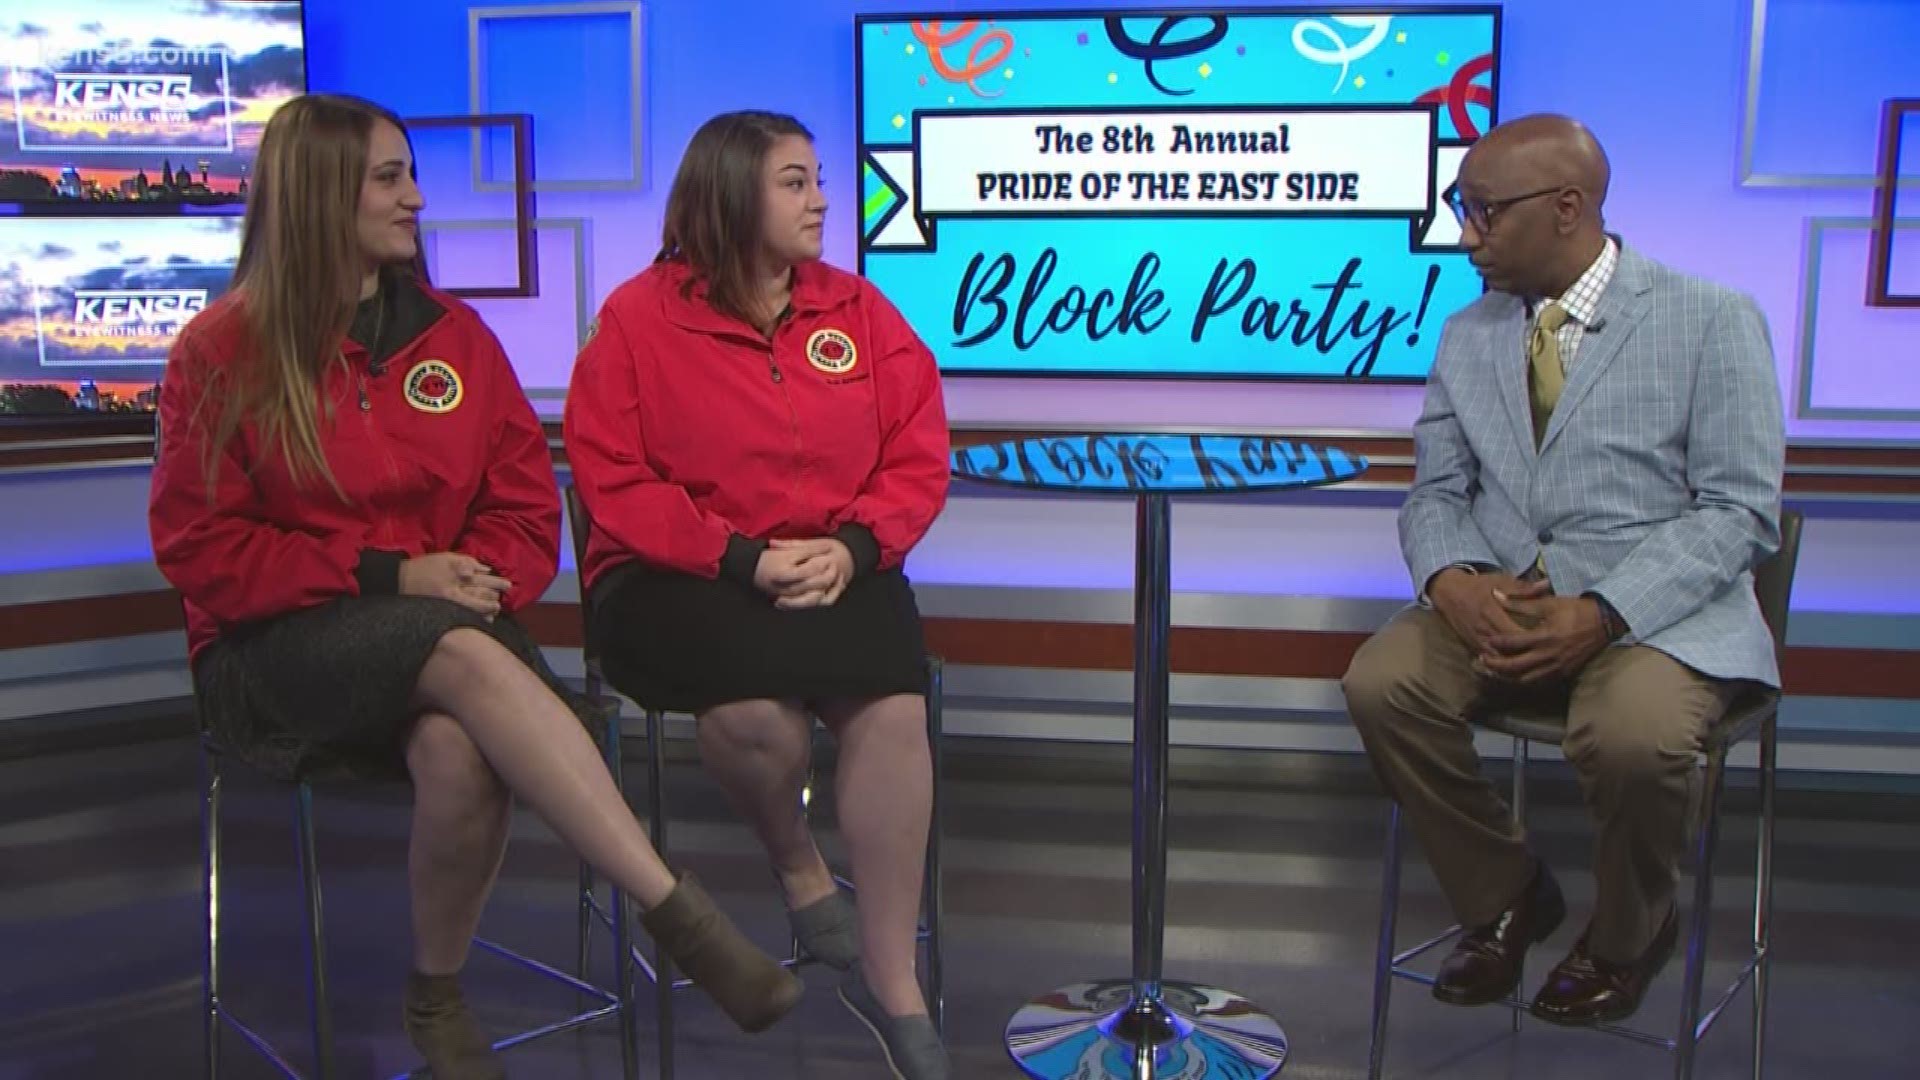 Don't miss out on the 8th Annual Pride of the East Side Block Party. City Year San Antonio stops by the KENS 5 studio to share what attendees can expect during this year's event.